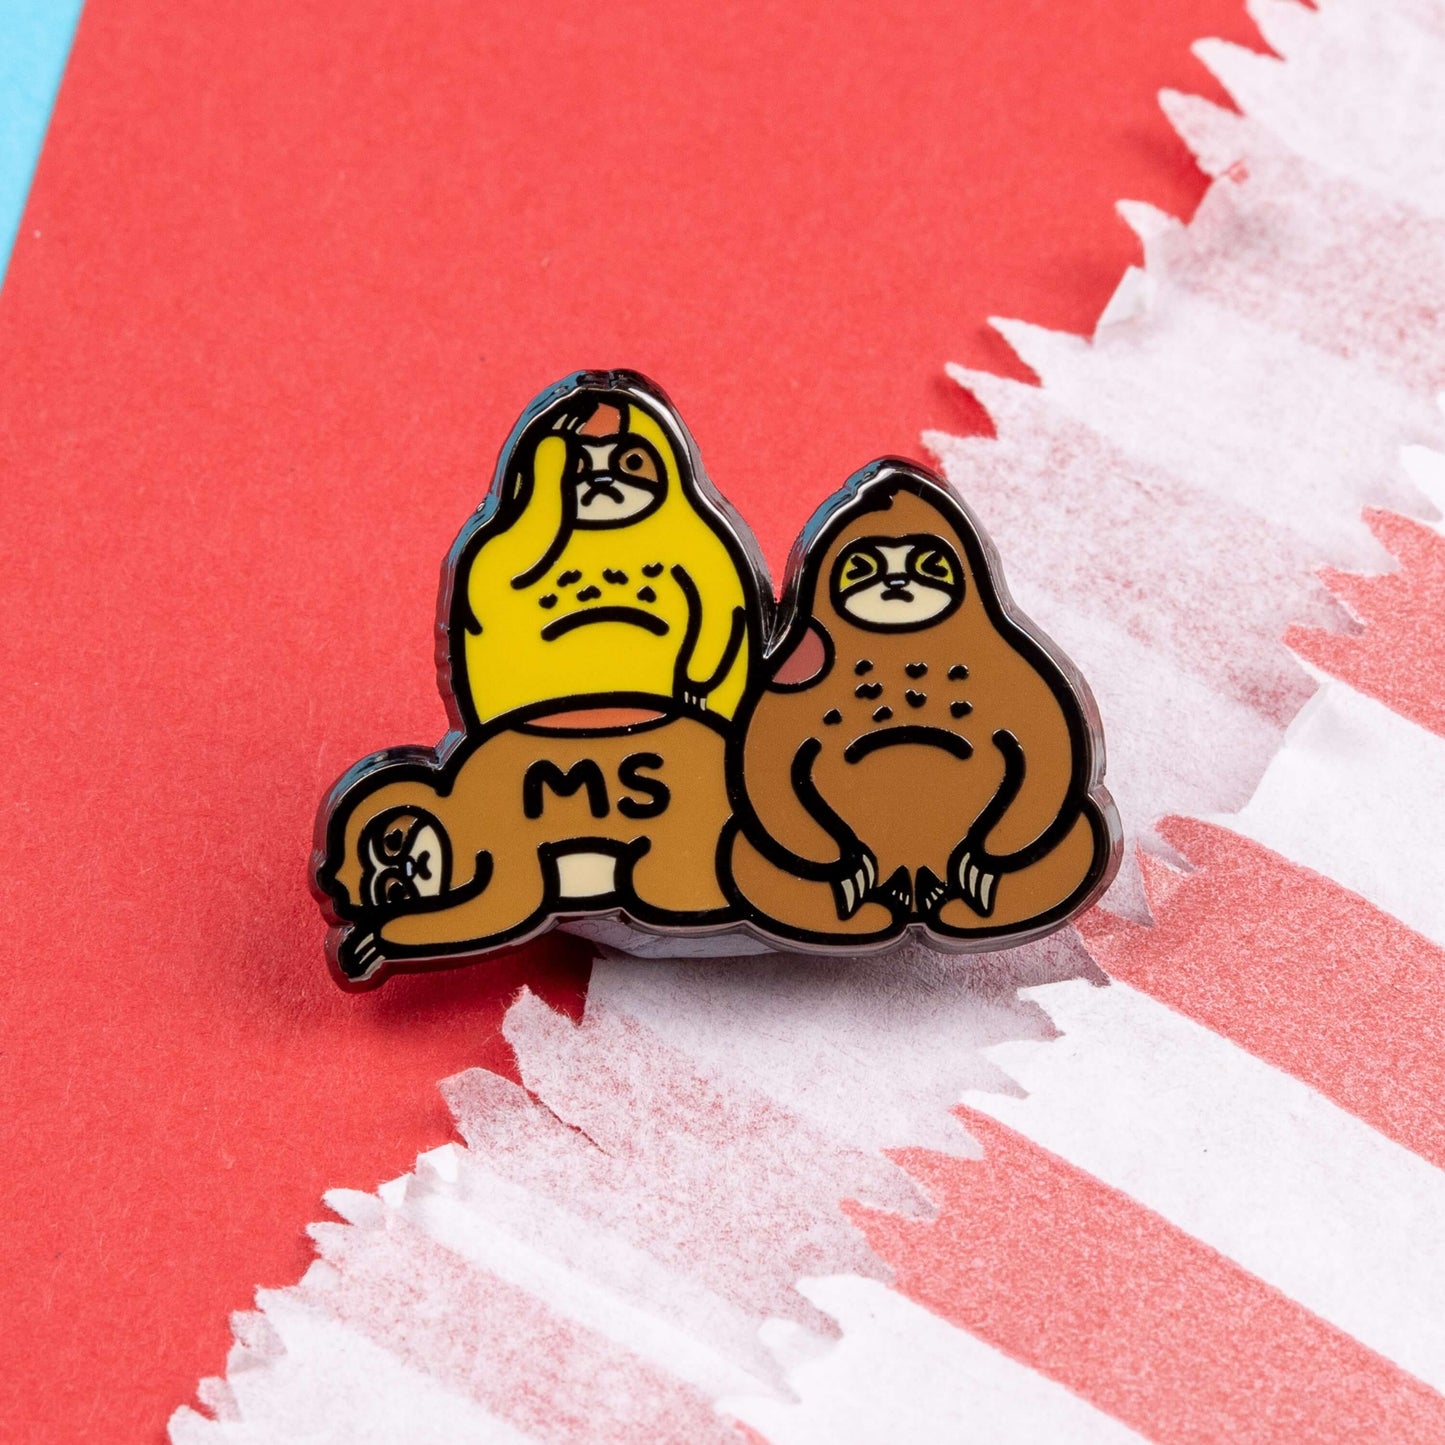 The Multiple Slowrosis Sloth Enamel Pin - Multiple Sclerosis / MS on a red and blue background. The pin of three sad sloths, two brown and one yellow, with red patches all over their body. Across one in black text reads 'MS'. The hand drawn design is raising awareness for Multiple Sclerosis / MS.